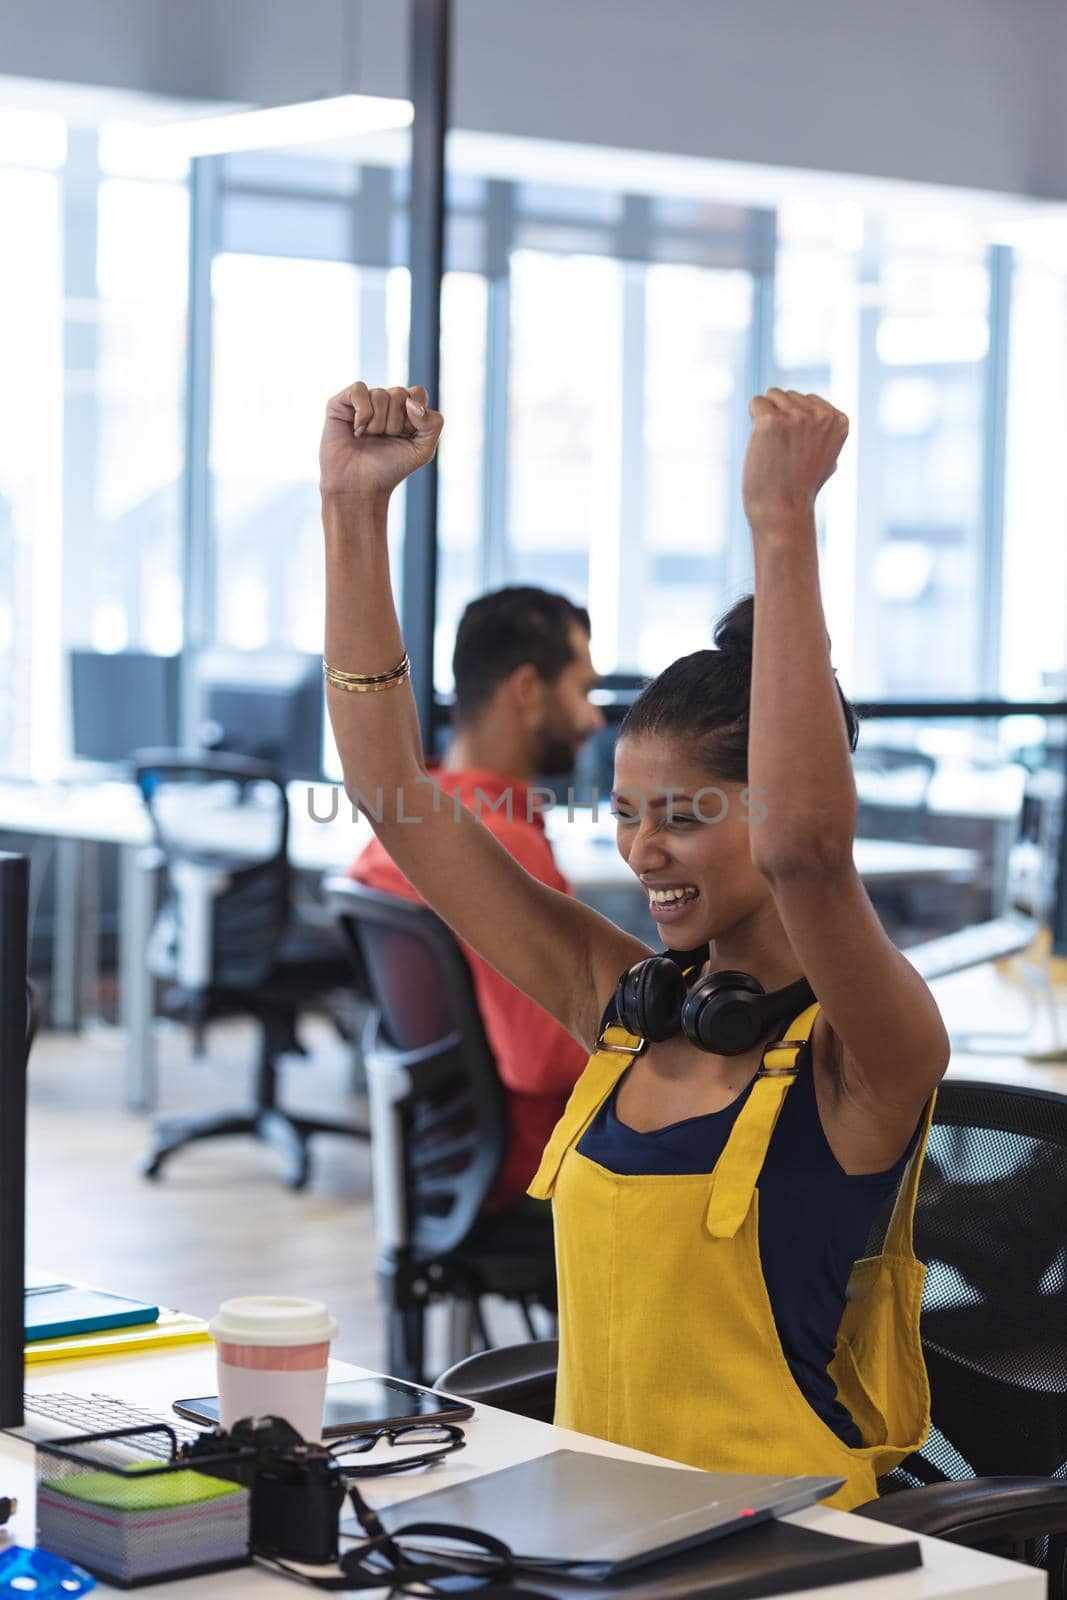 Mixed race female creative sitting at desk celebrating raising her arms and smiling. modern office of a creative design business.